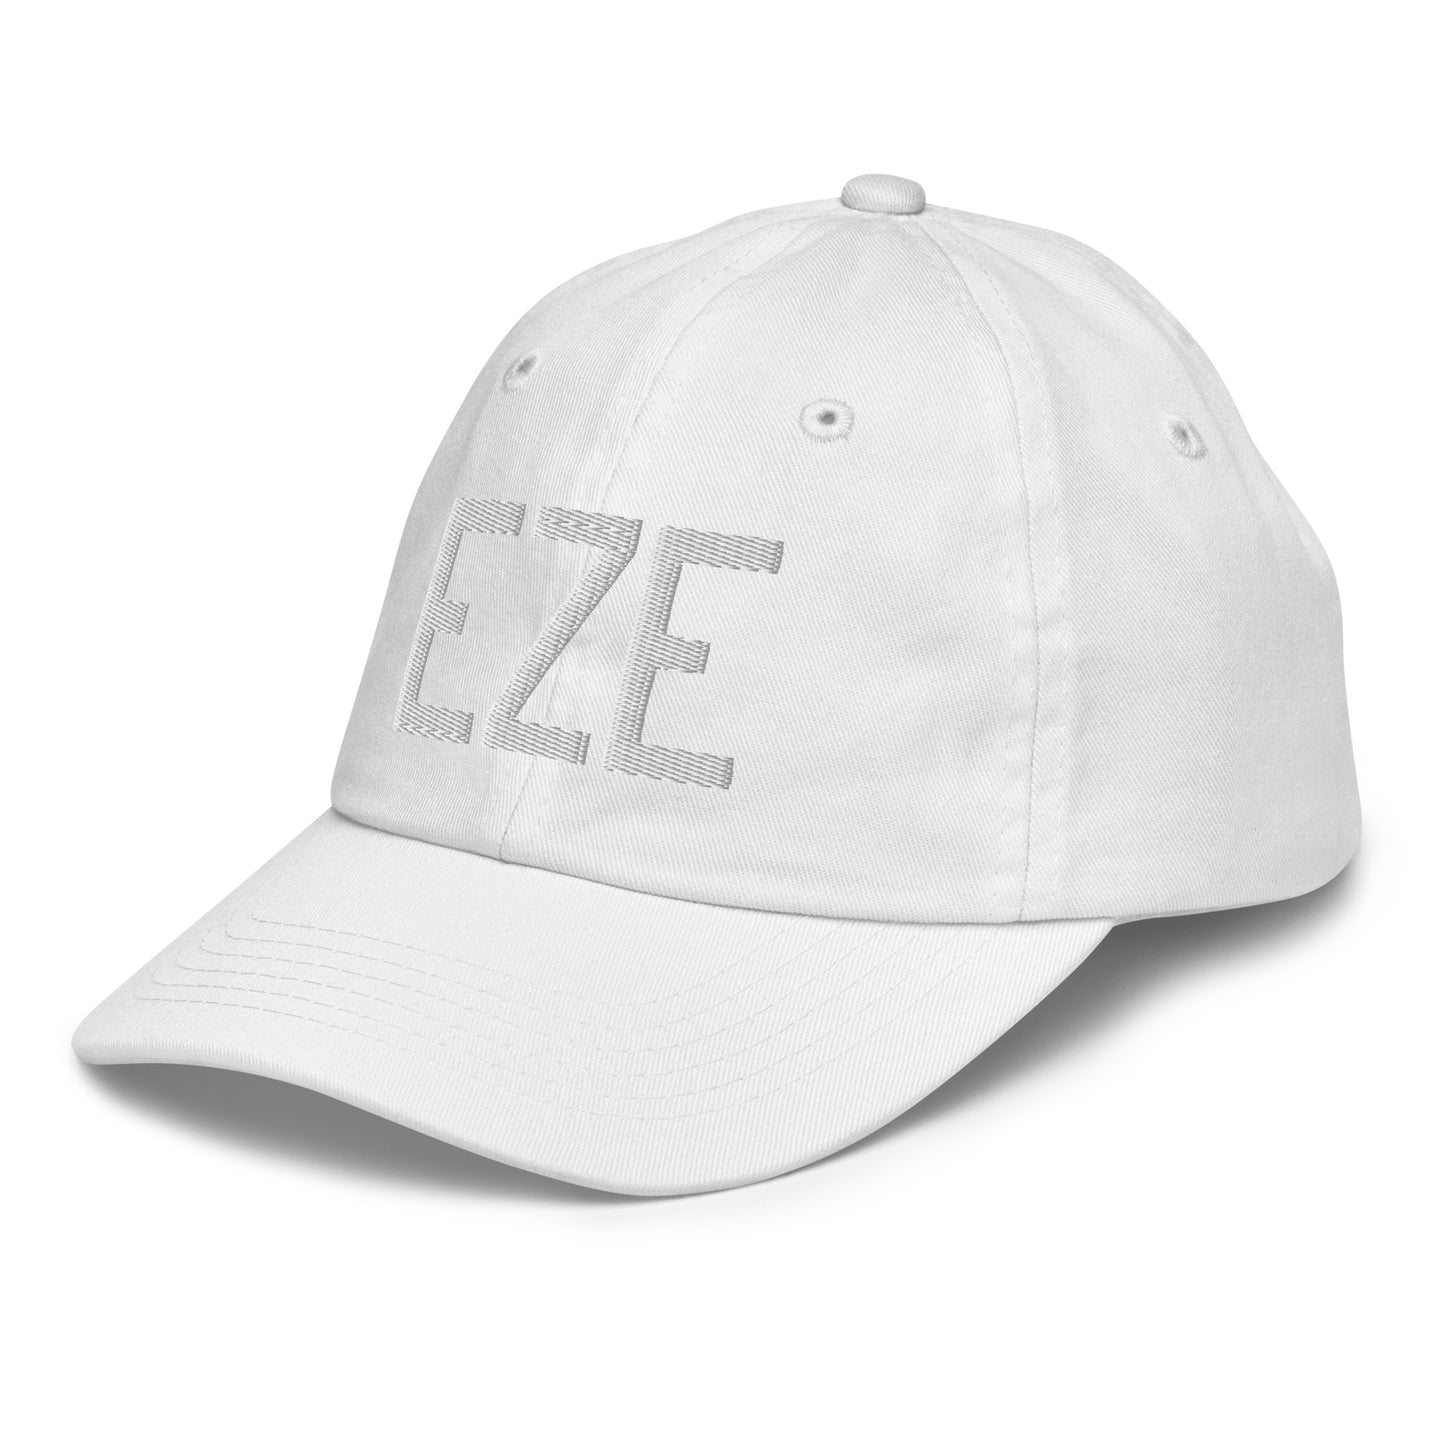 Airport Code Kid's Baseball Cap - White • EZE Buenos Aires • YHM Designs - Image 36